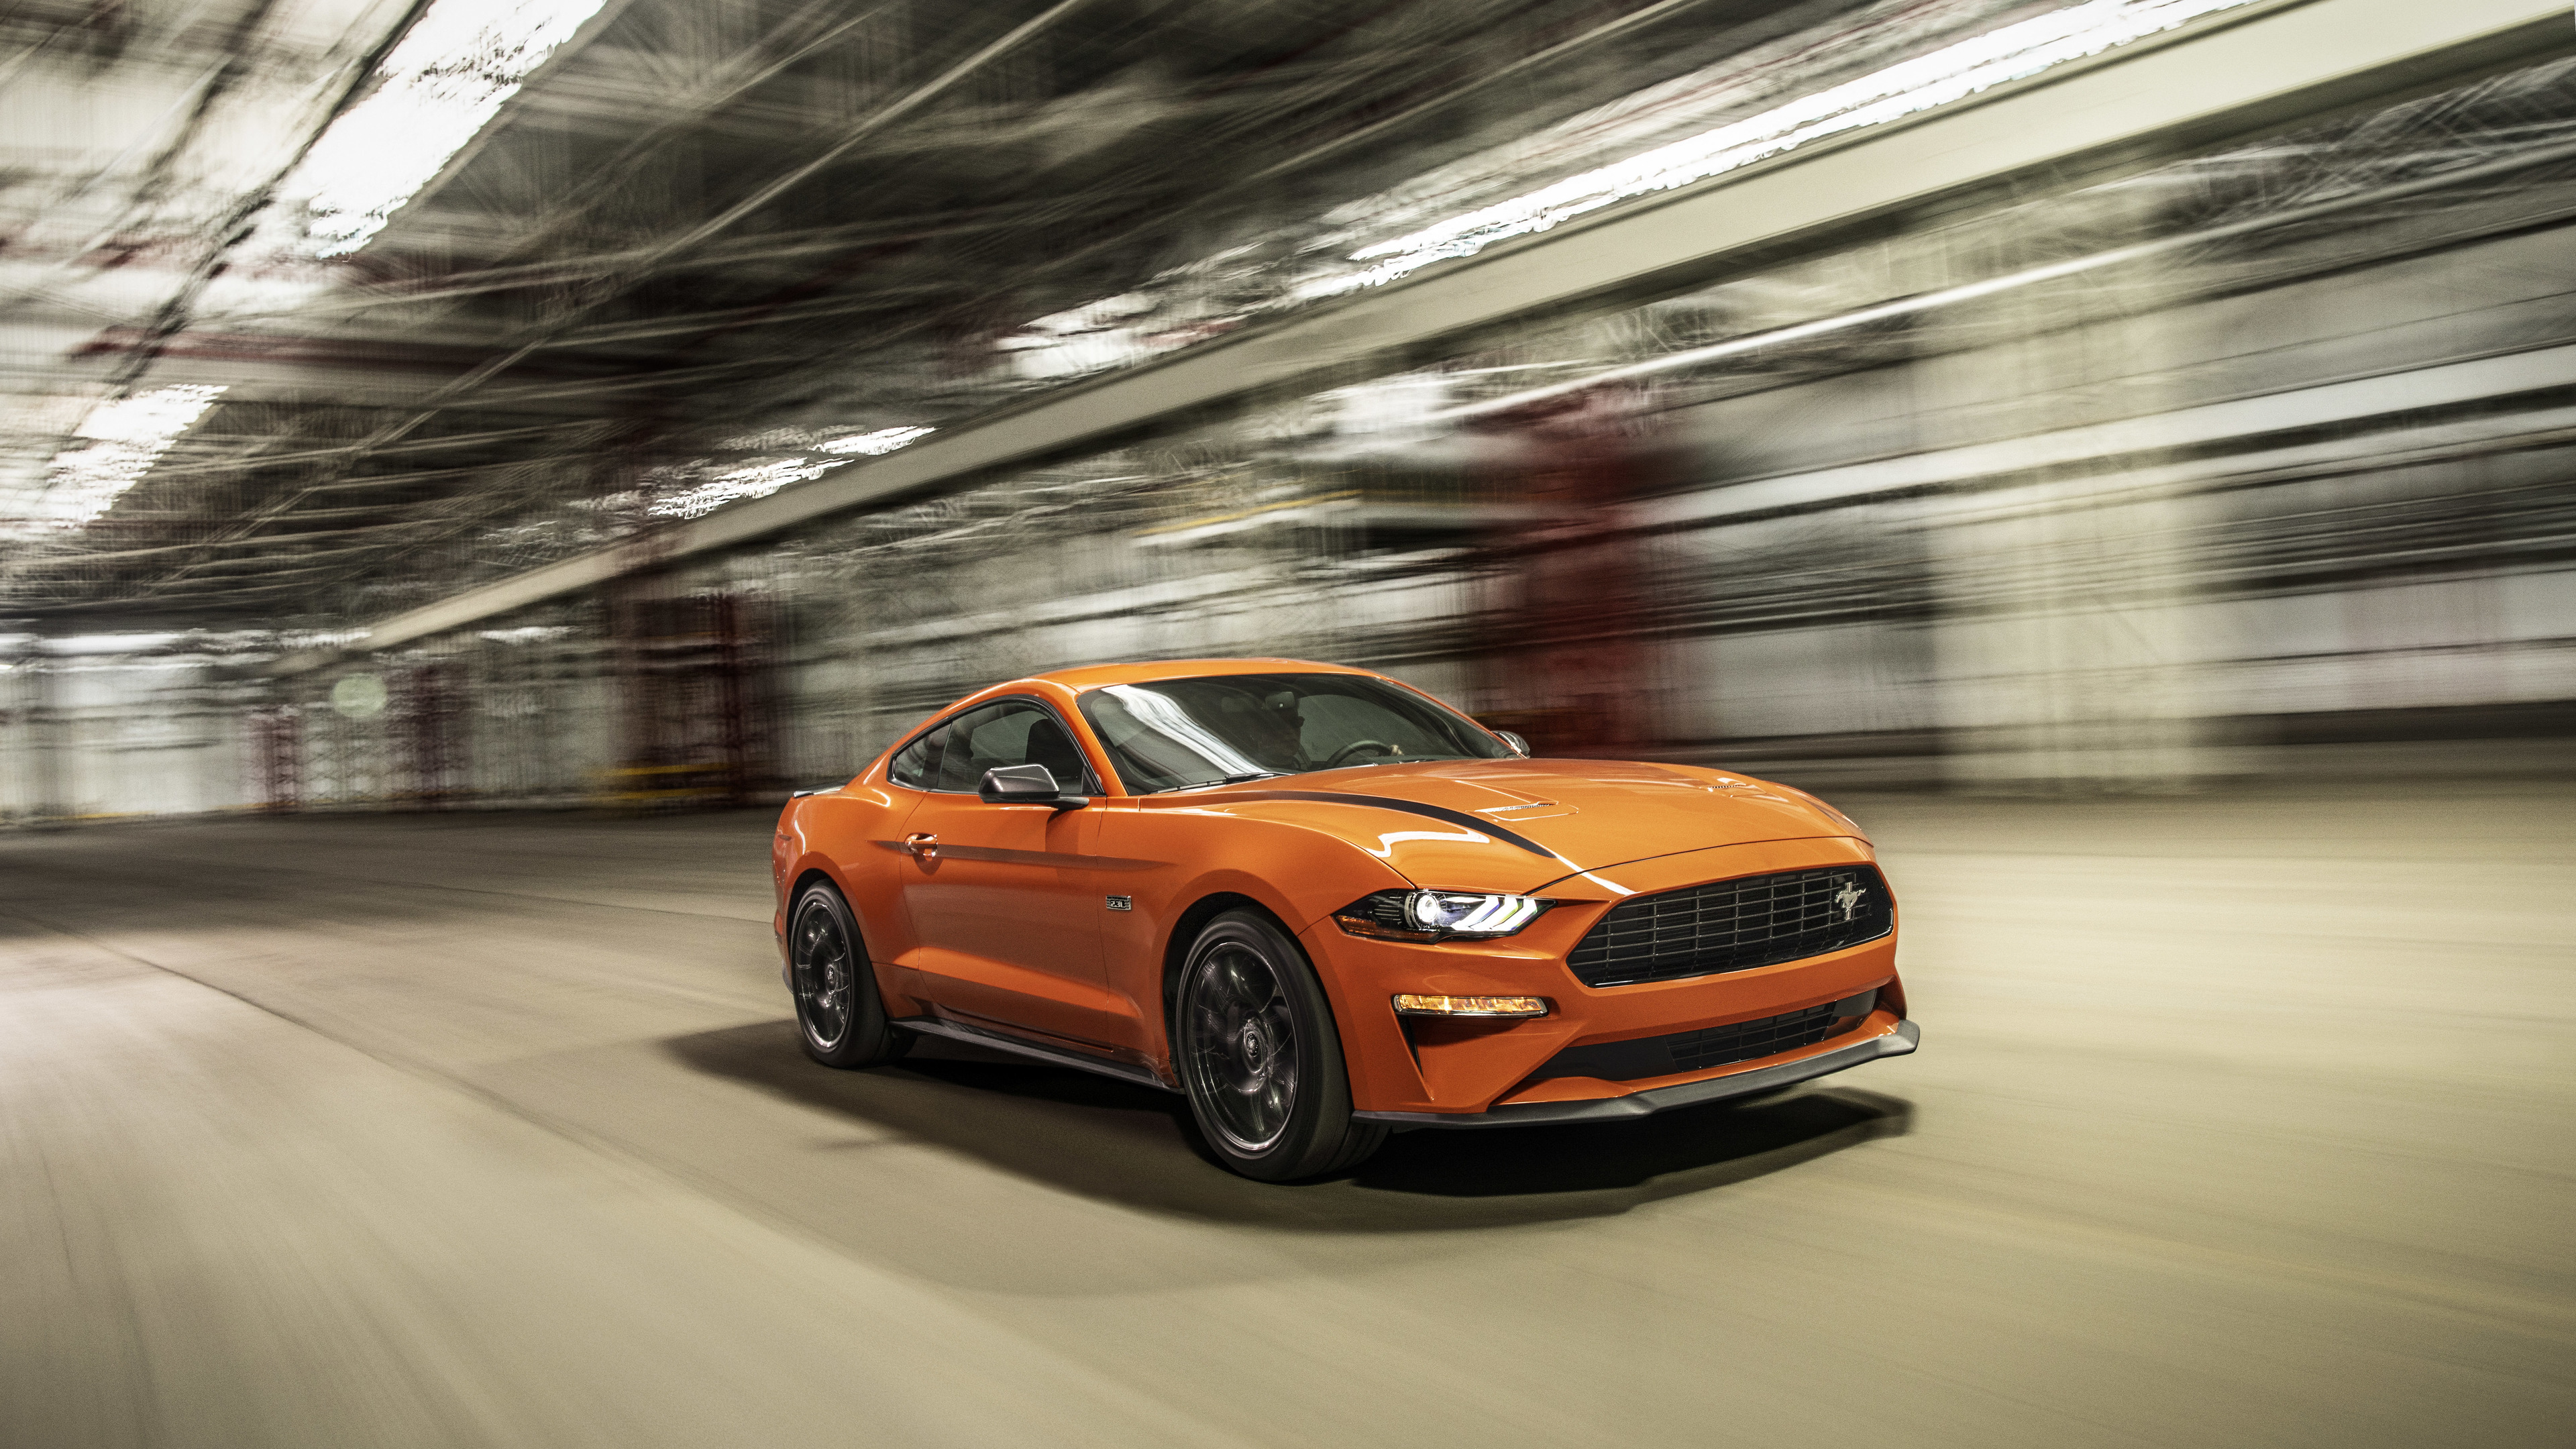 ford mustang ecoboost high performance package 4k 2020 1556185356 - Ford Mustang EcoBoost High Performance Package 4k 2020 - hd-wallpapers, ford mustang wallpapers, cars wallpapers, 5k wallpapers, 4k-wallpapers, 2020 cars wallpapers